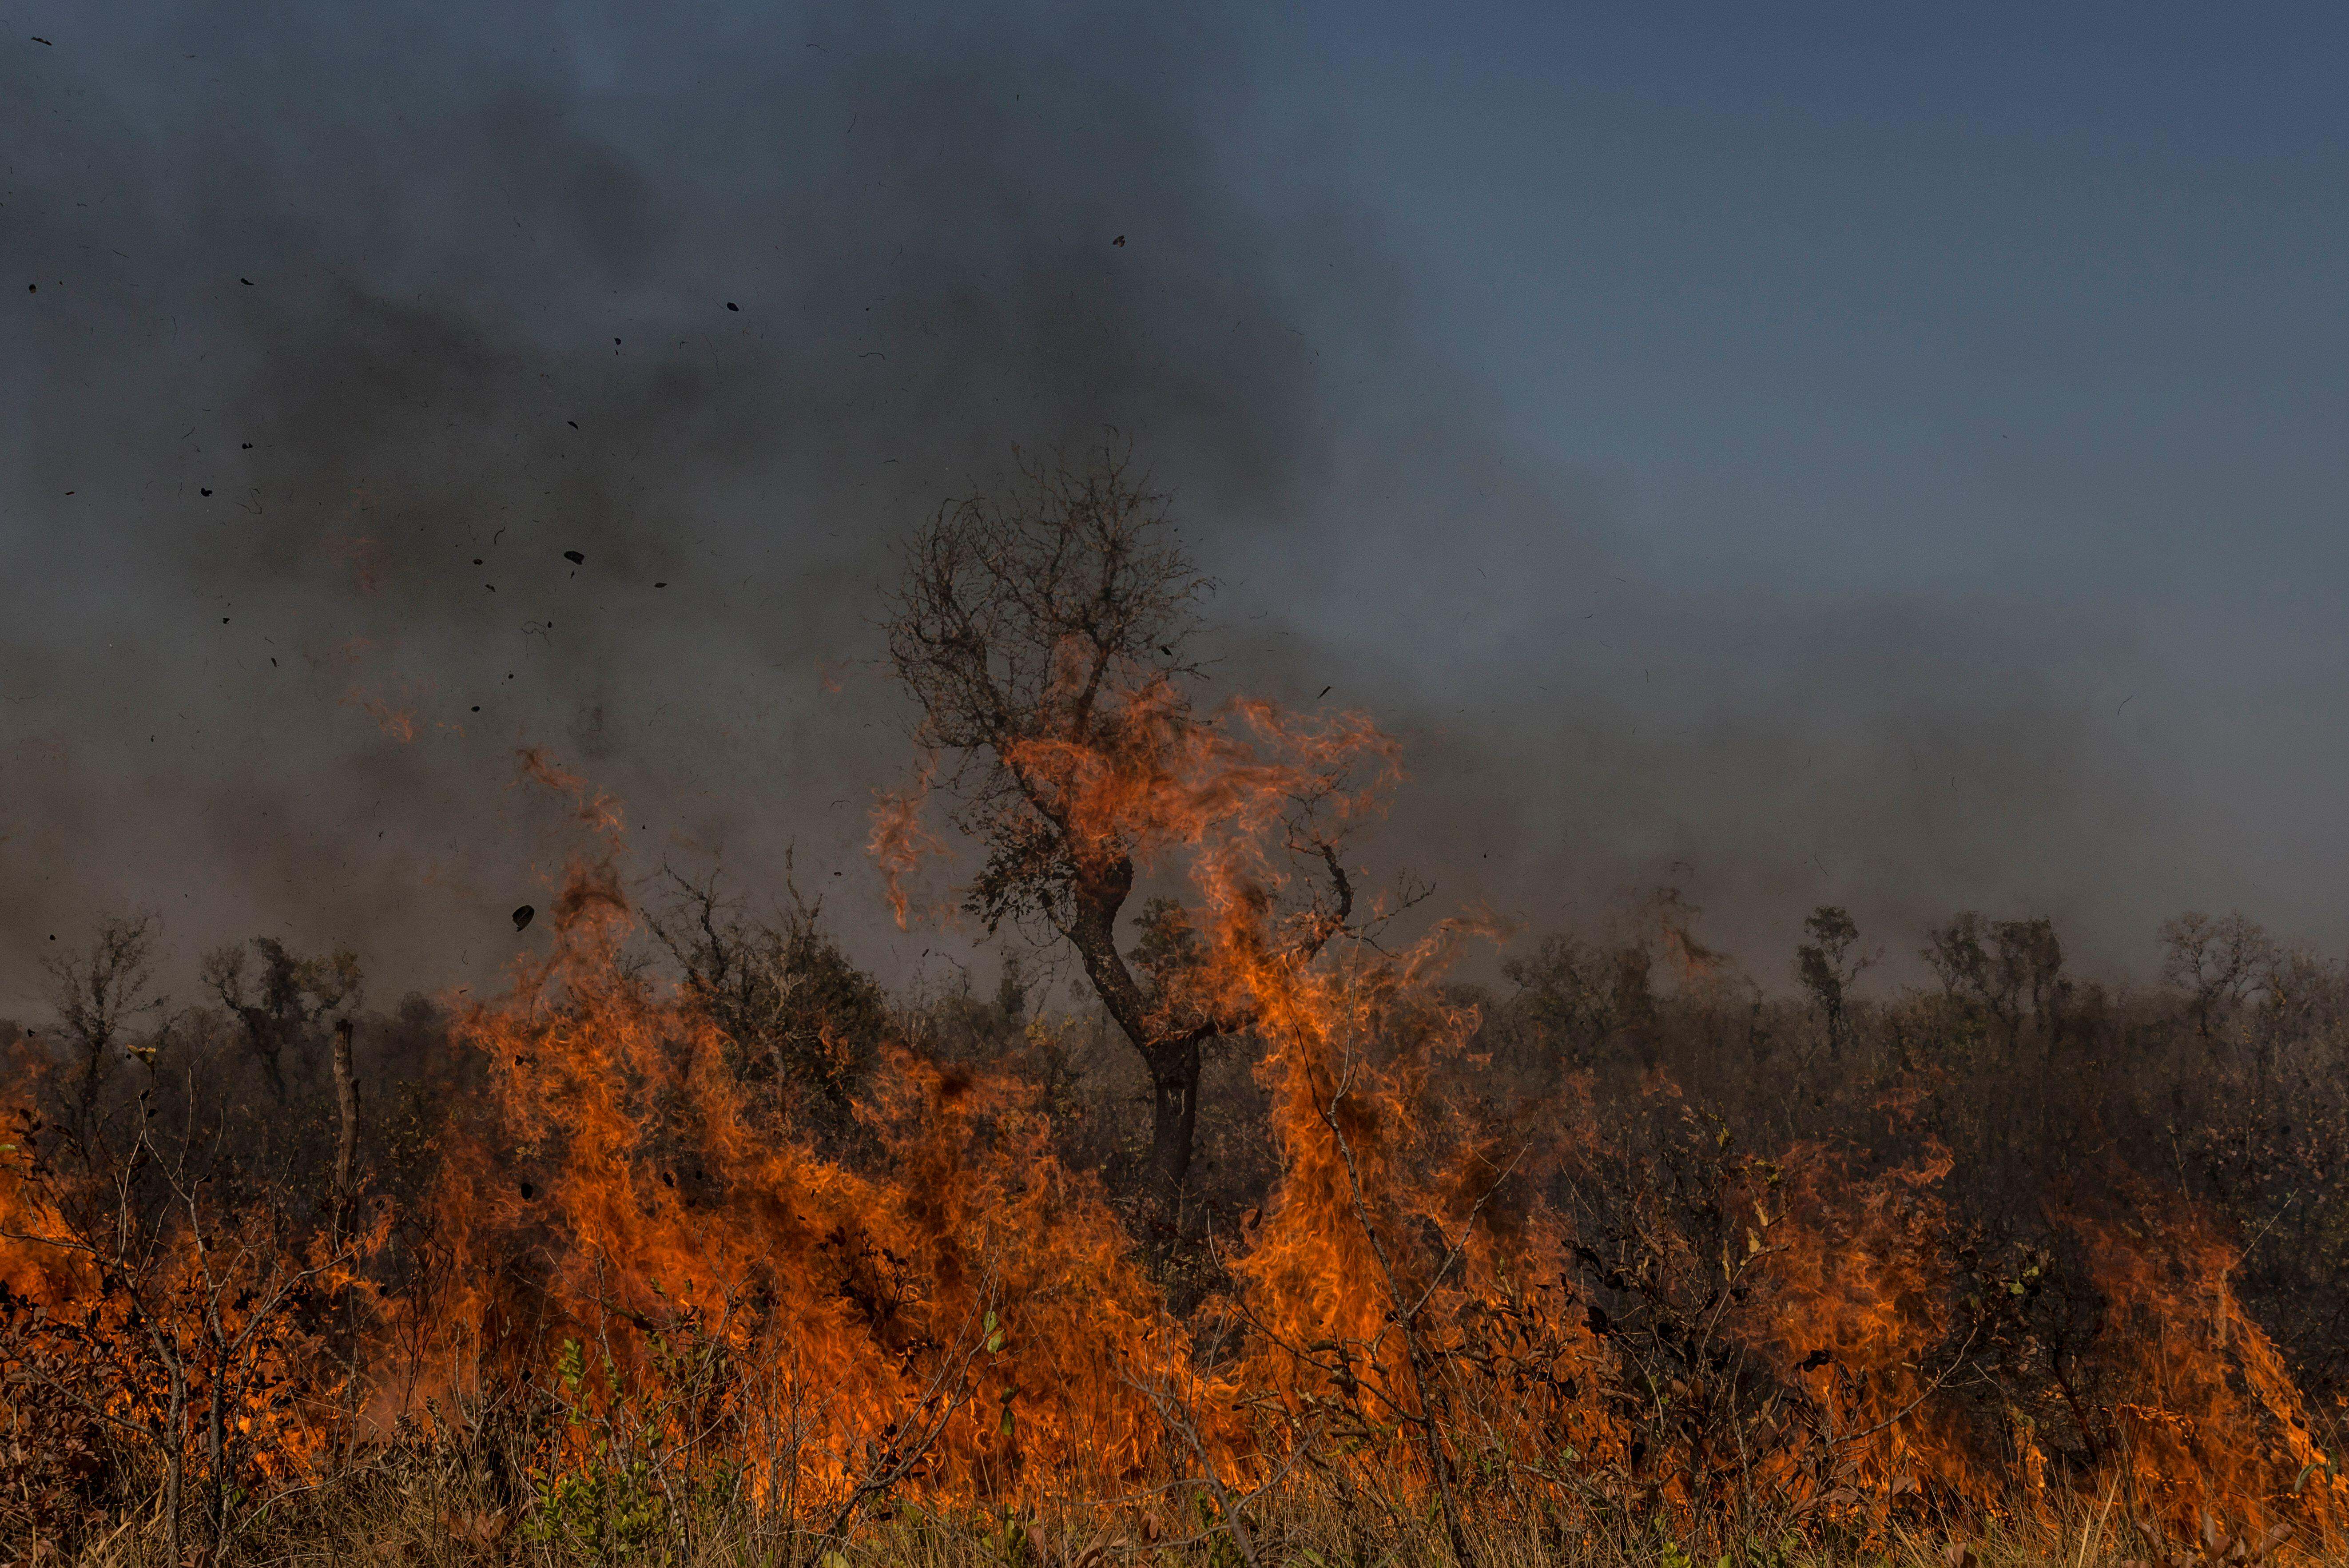 flames reach the top of trees and shrubs in a dry forest.